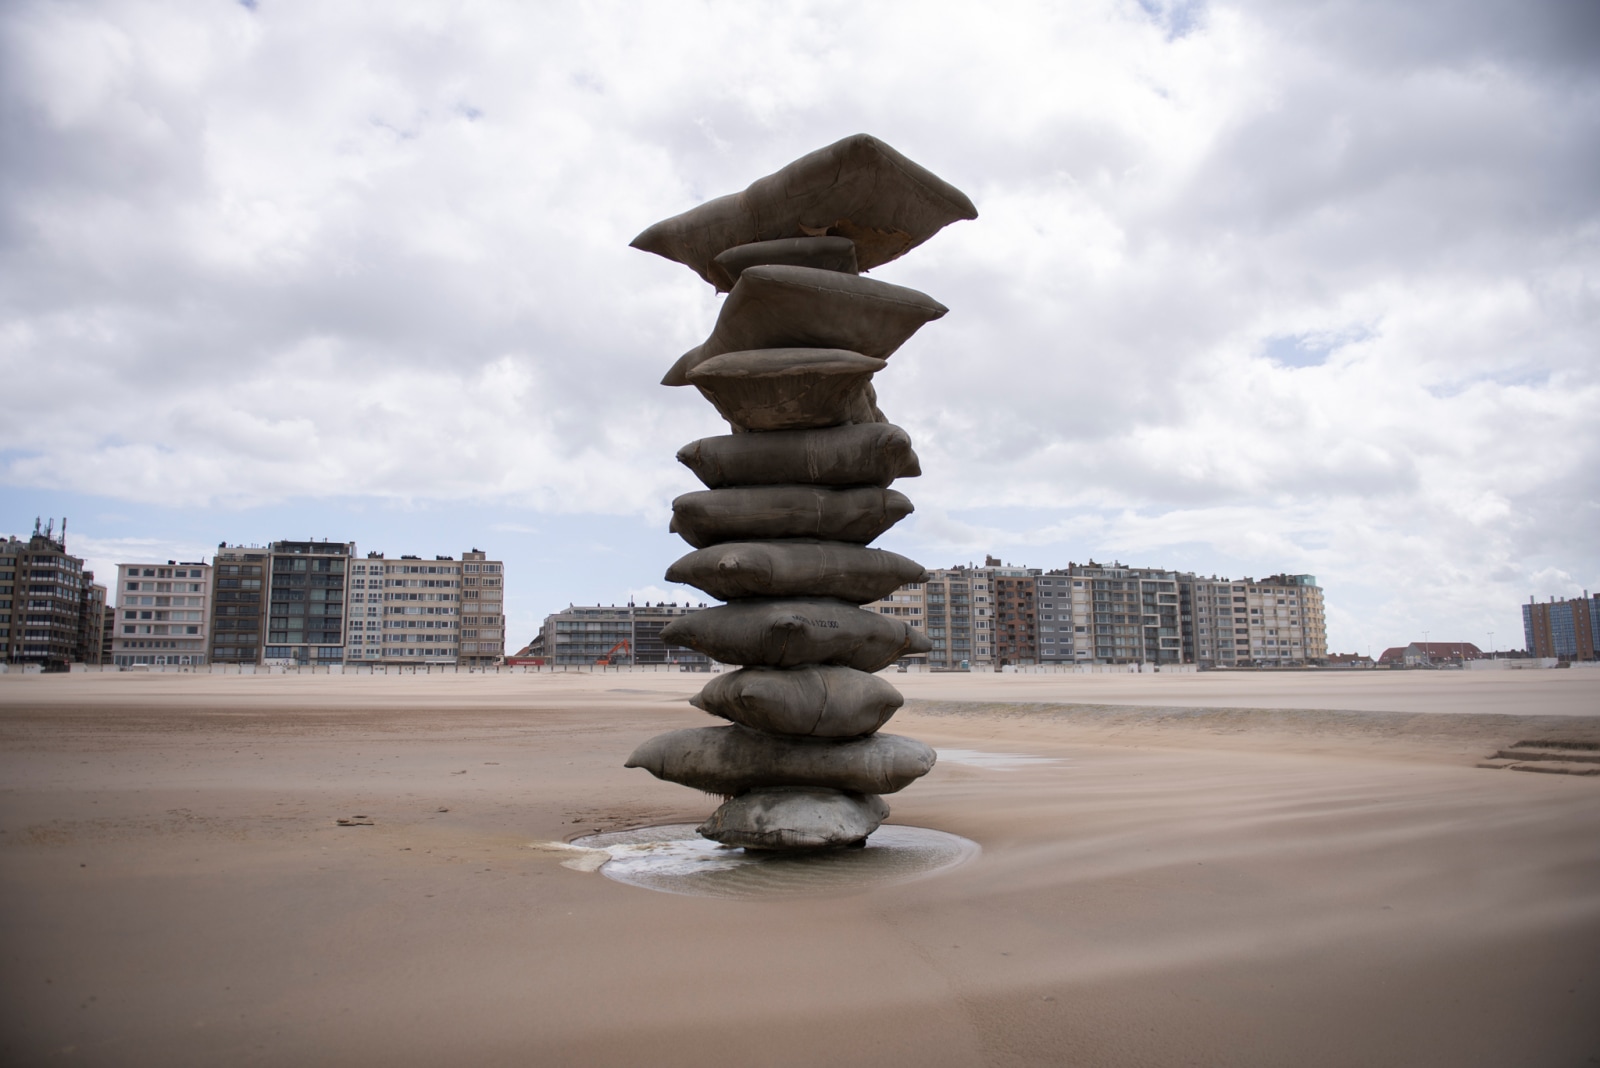 <div class="image_caption_container"><div class="image_caption">Rosa Barba, <strong>Pillage of the Sea</strong>, permanent sculpture for Beaufort Triennial, Belgium, 2021. Photo © Beaufort Triennial</div></div>